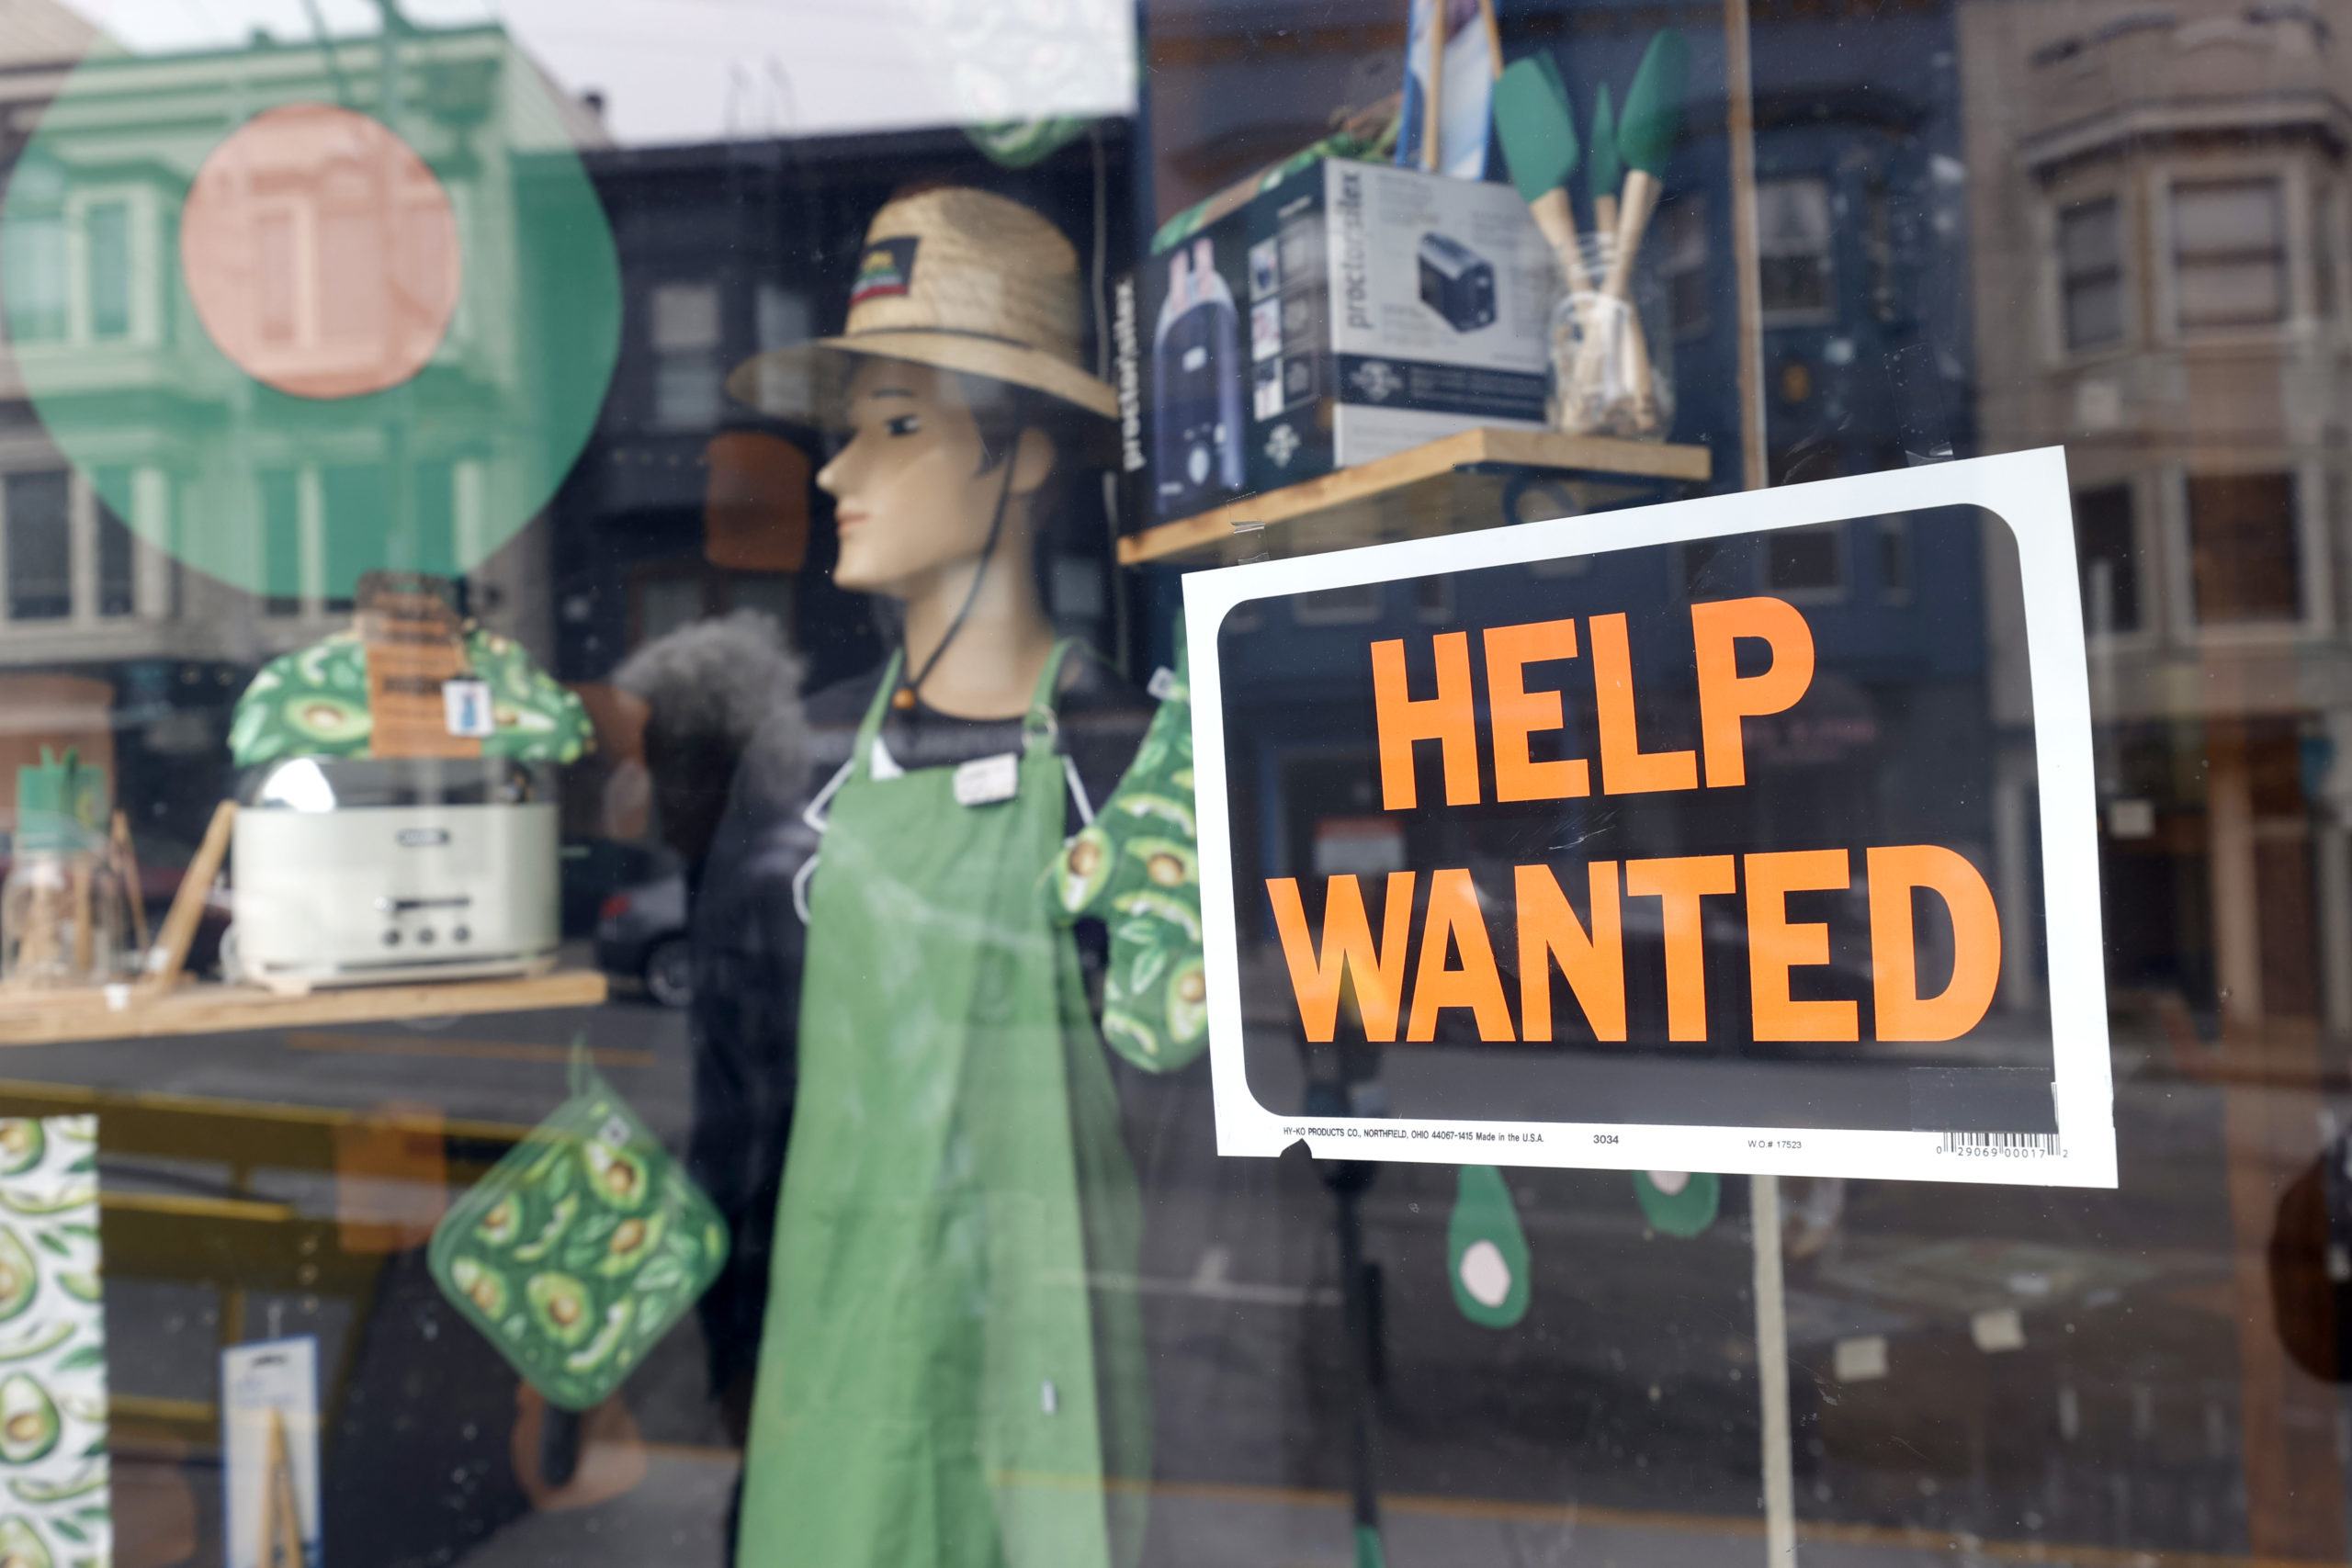 SAN FRANCISCO, CALIFORNIA - SEPTEMBER 16: A help wanted sign is posted in the window of hardware store on September 16, 2021 in San Francisco, California. Unemployment claims inched up to 332,000 from a pandemic low of 312,000 a week before. (Photo by Justin Sullivan/Getty Images)